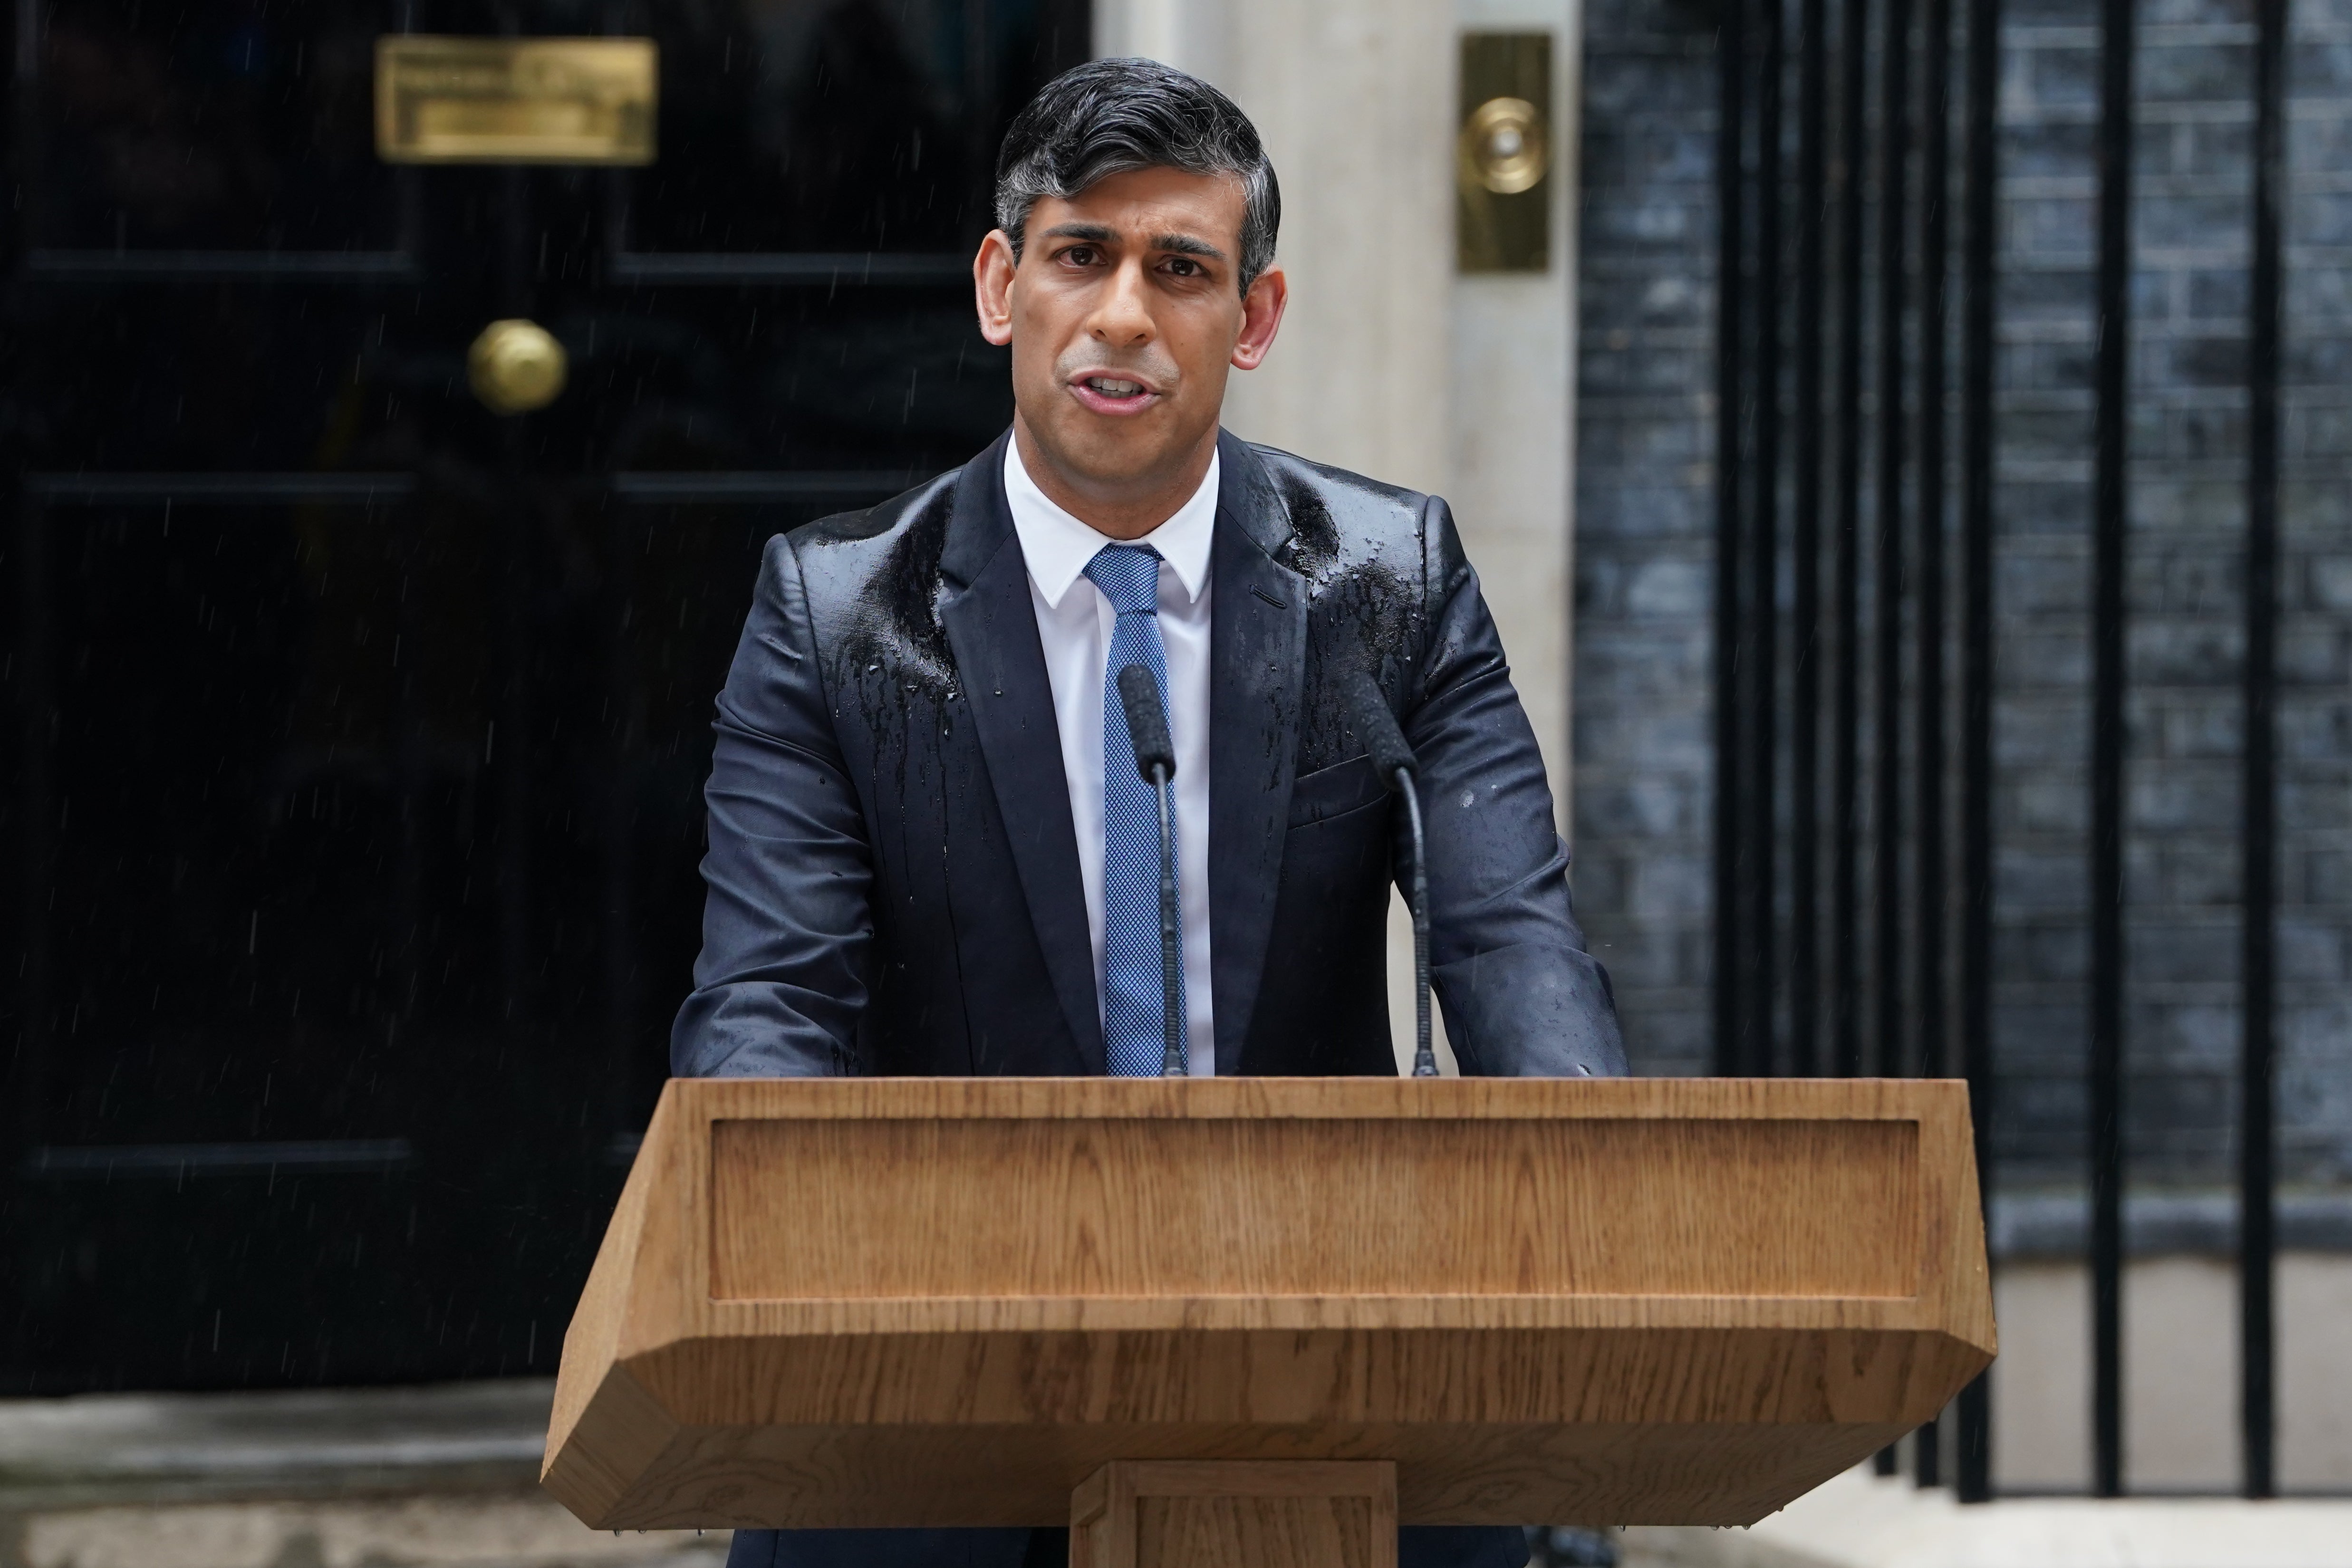 Prime Minister Rishi Sunak announcing the date of the general election outside 10 Downing Street (Lucy North/PA)